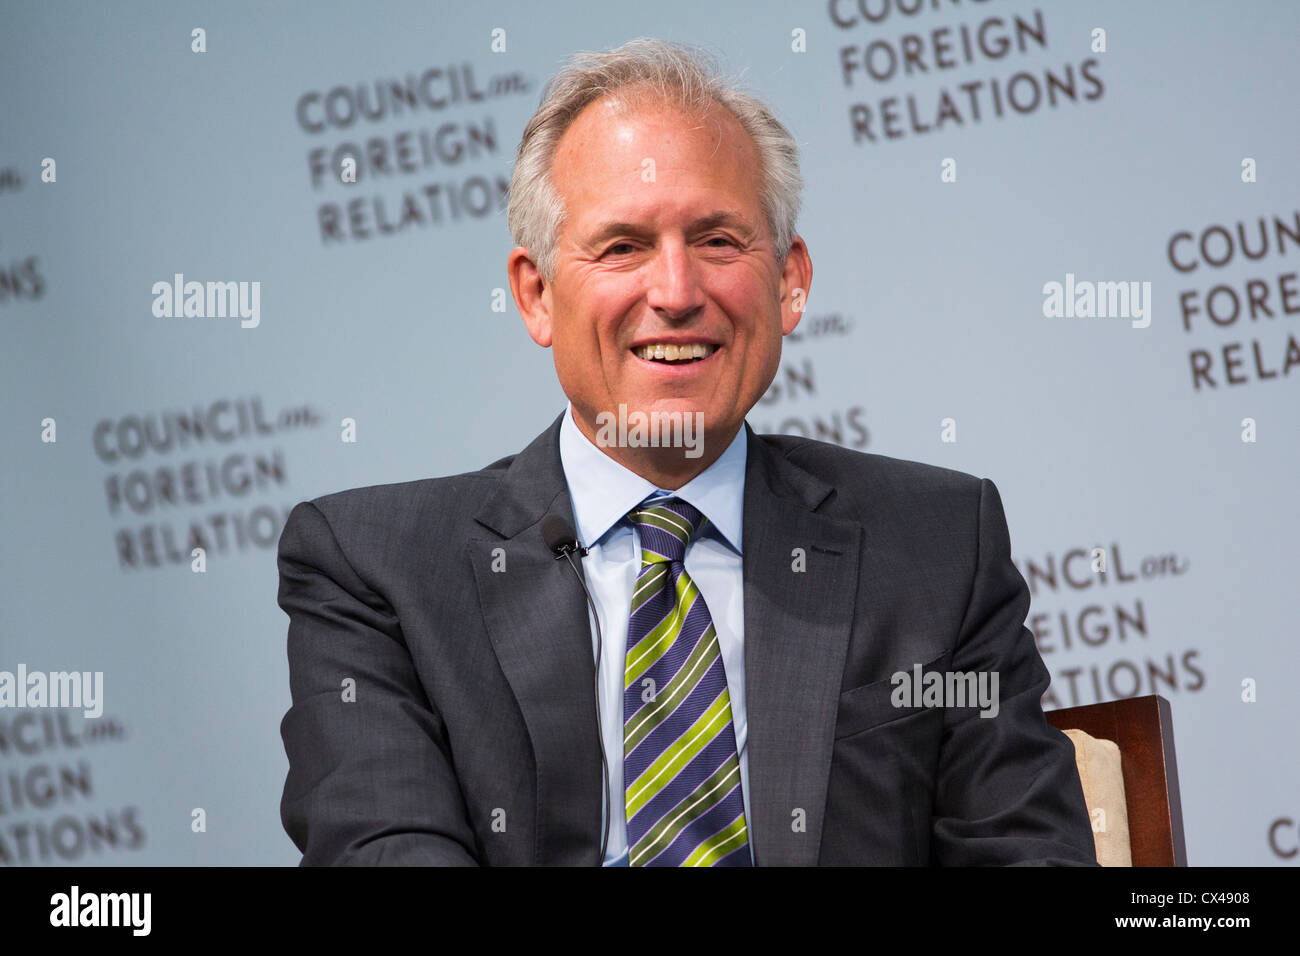 James "Jim" McNerney, Chairman, President und Chief Executive Officer (CEO) von The Boeing Company. Stockfoto